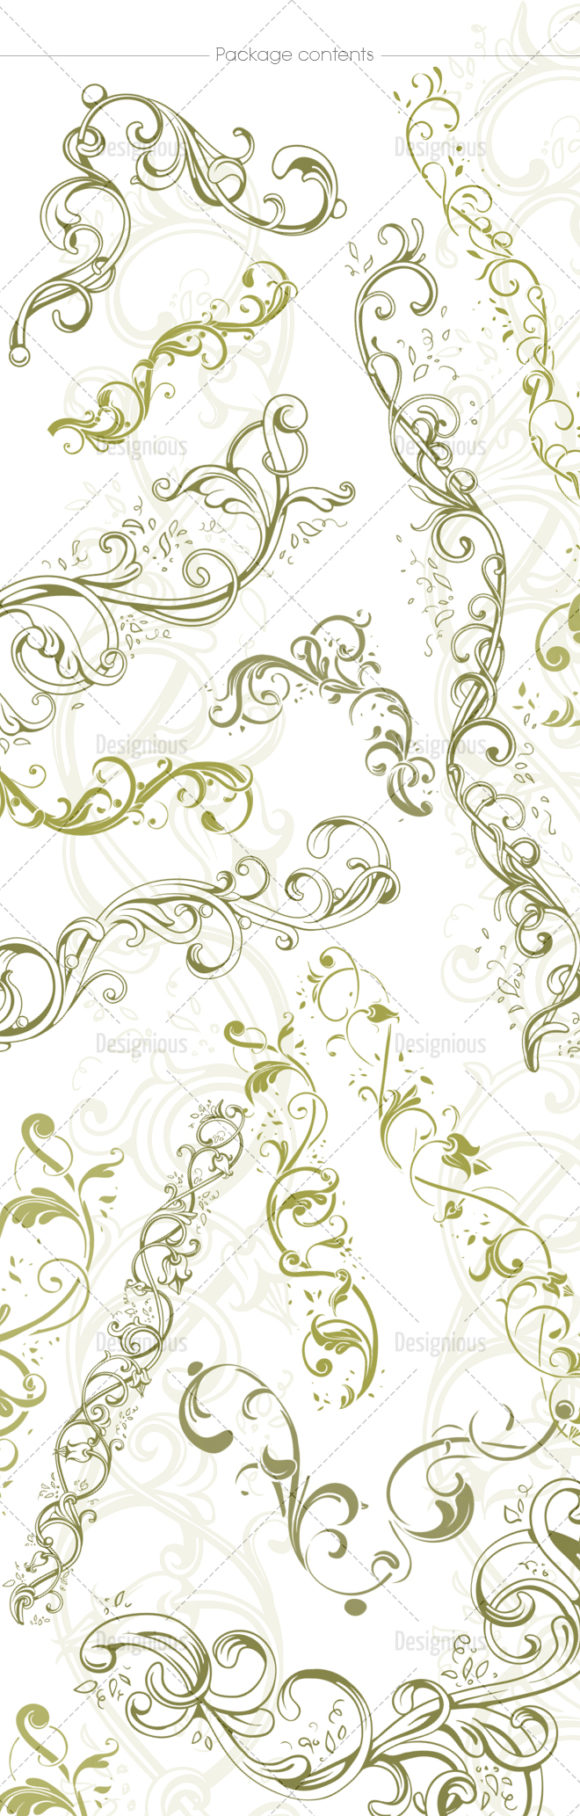 Floral Brushes Pack 55 2